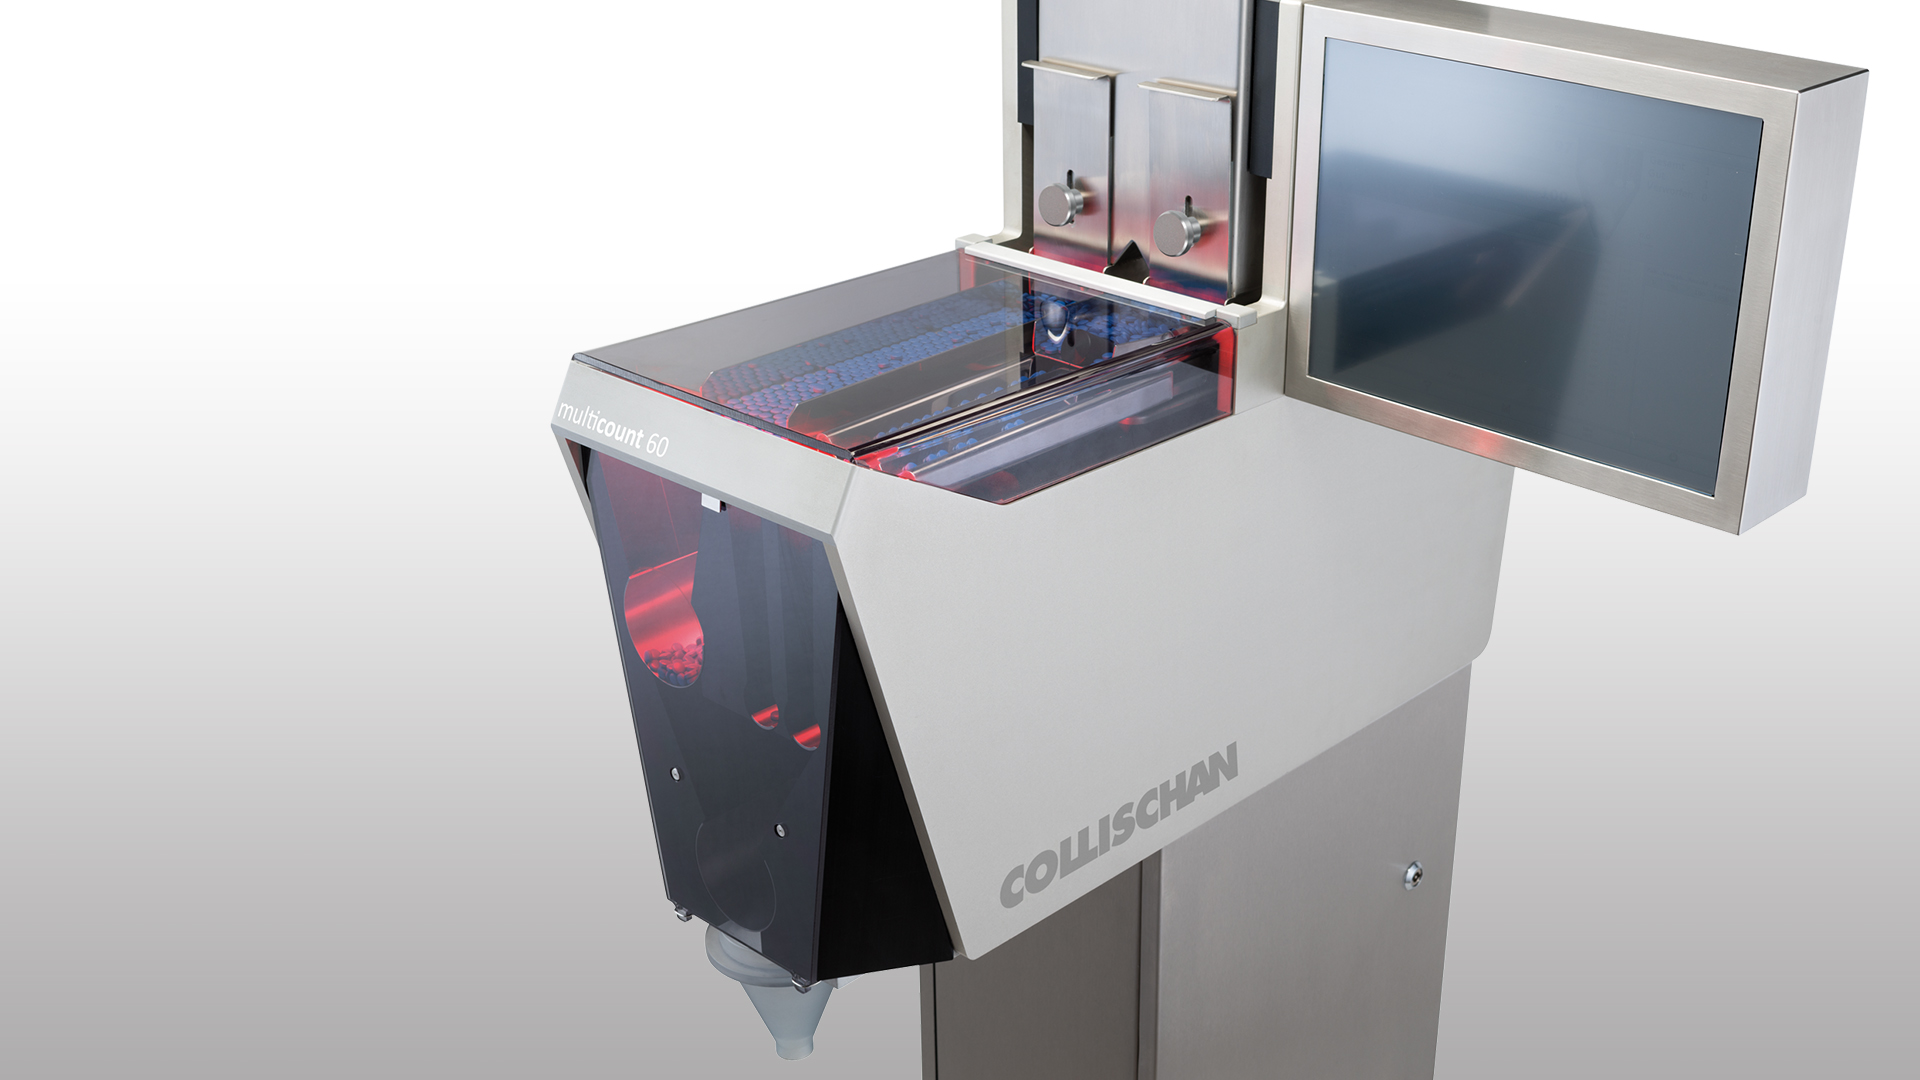 The technically optimized, formally minimized design concept of the tablet counting machine multicount60 from Collischan convinced the jury! HighSpeed ​​tablet counting machine multicount60 from Collischan receives iF Product Design Award! Collischan - iF Product Design Award 2015 - design award - designship GmbH - Product design - Industrial design - Machine design - Interface design - iF world design index - Top 25 Industry - Top 100 design studios worldwide - we love design